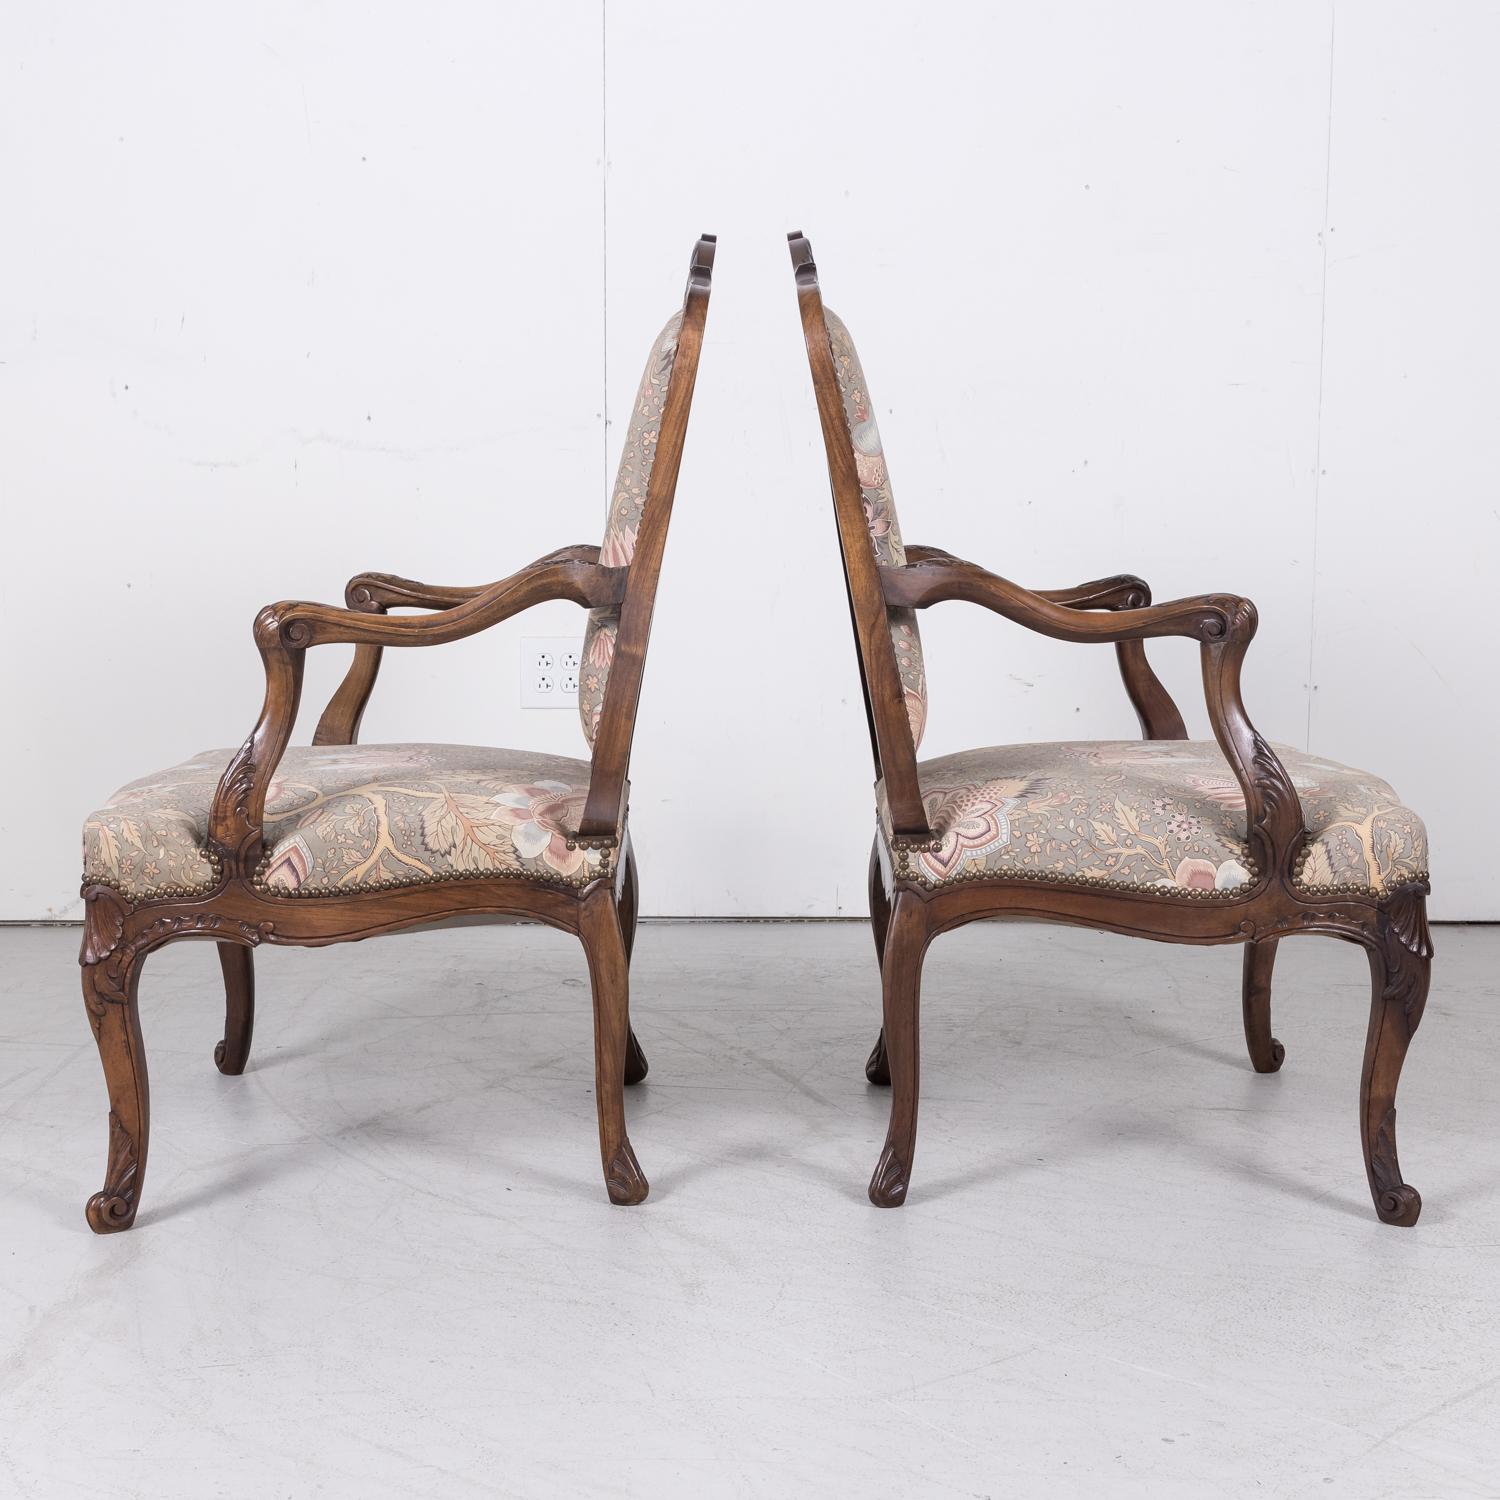 Fine Pair of 18th Century French Louis XV Period Carved Walnut Fauteuils For Sale 11